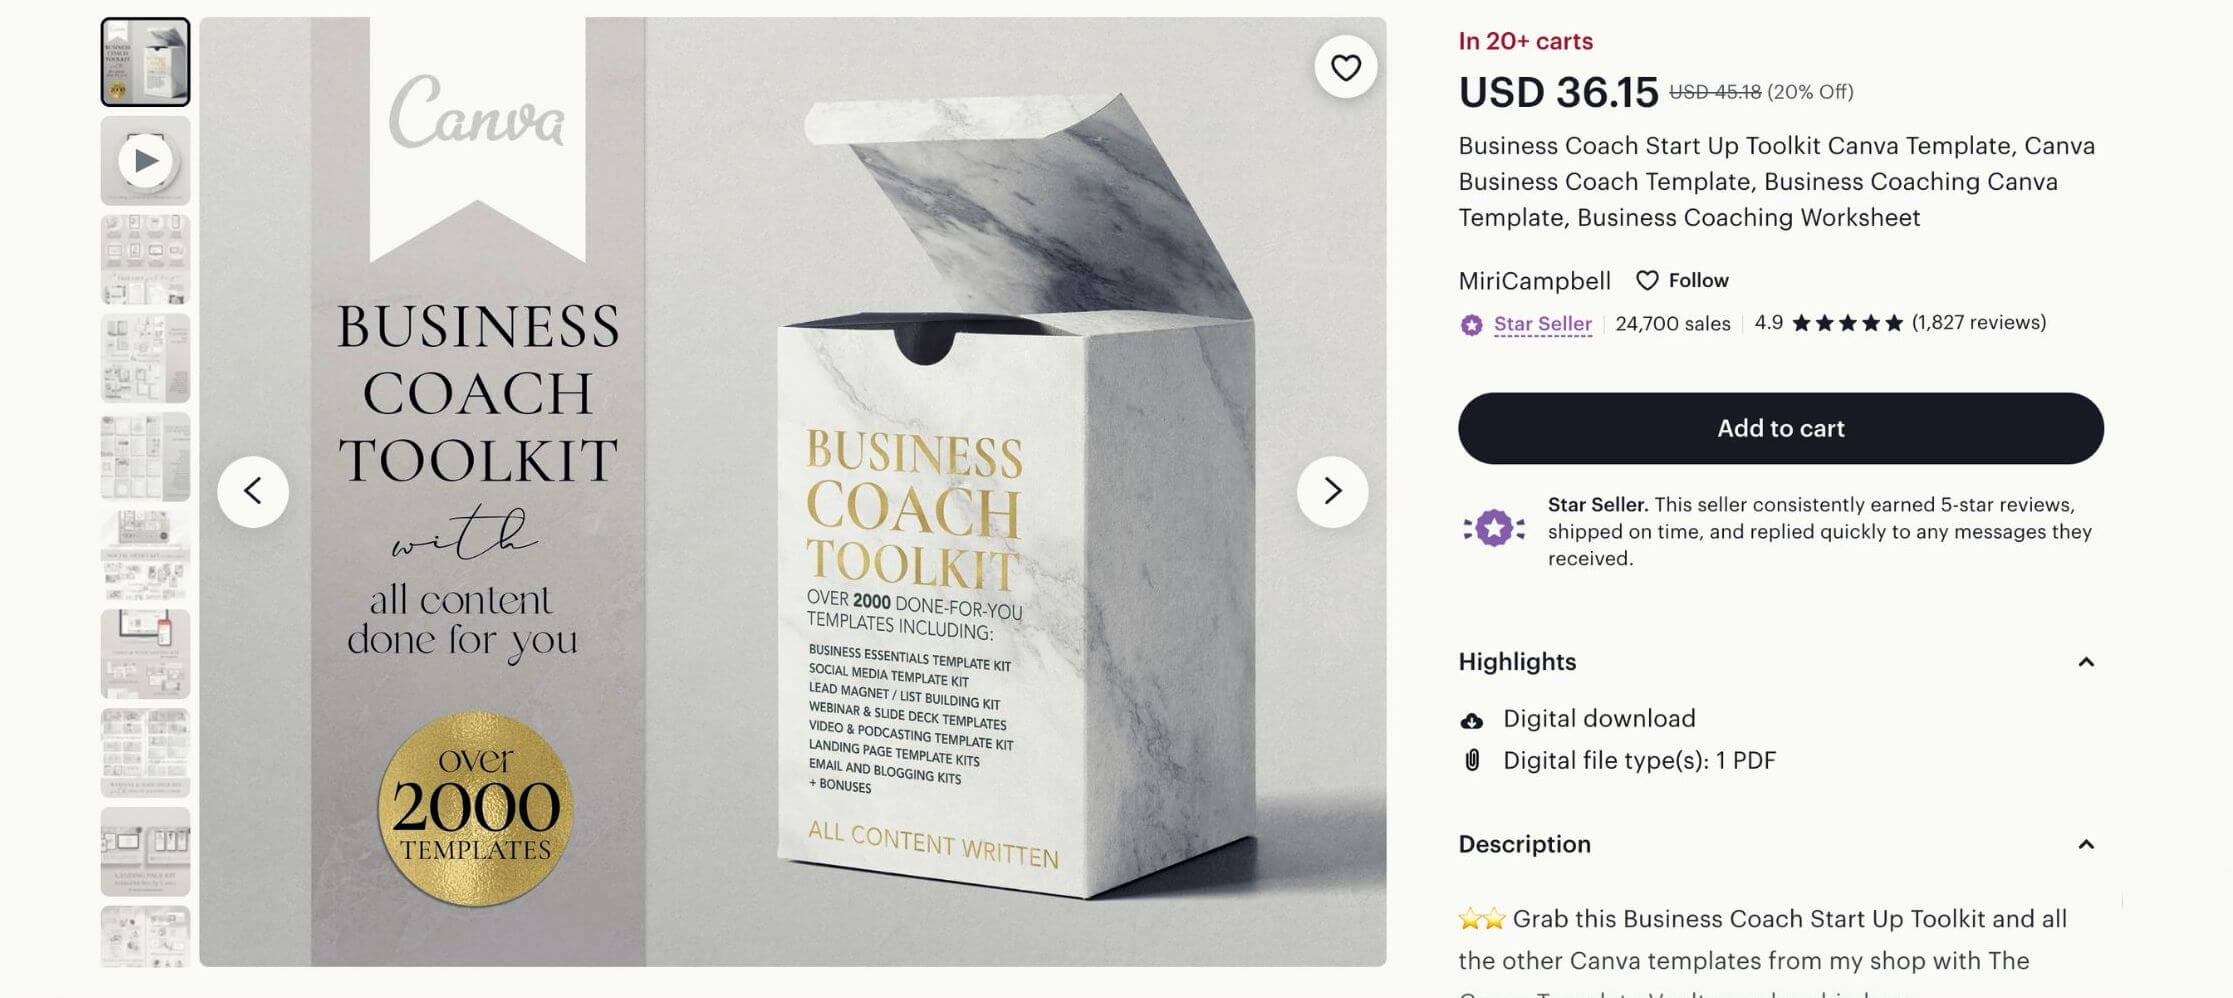 A screenshot from a Business Coach Start-Up Toolkit Canva Template from Etsy